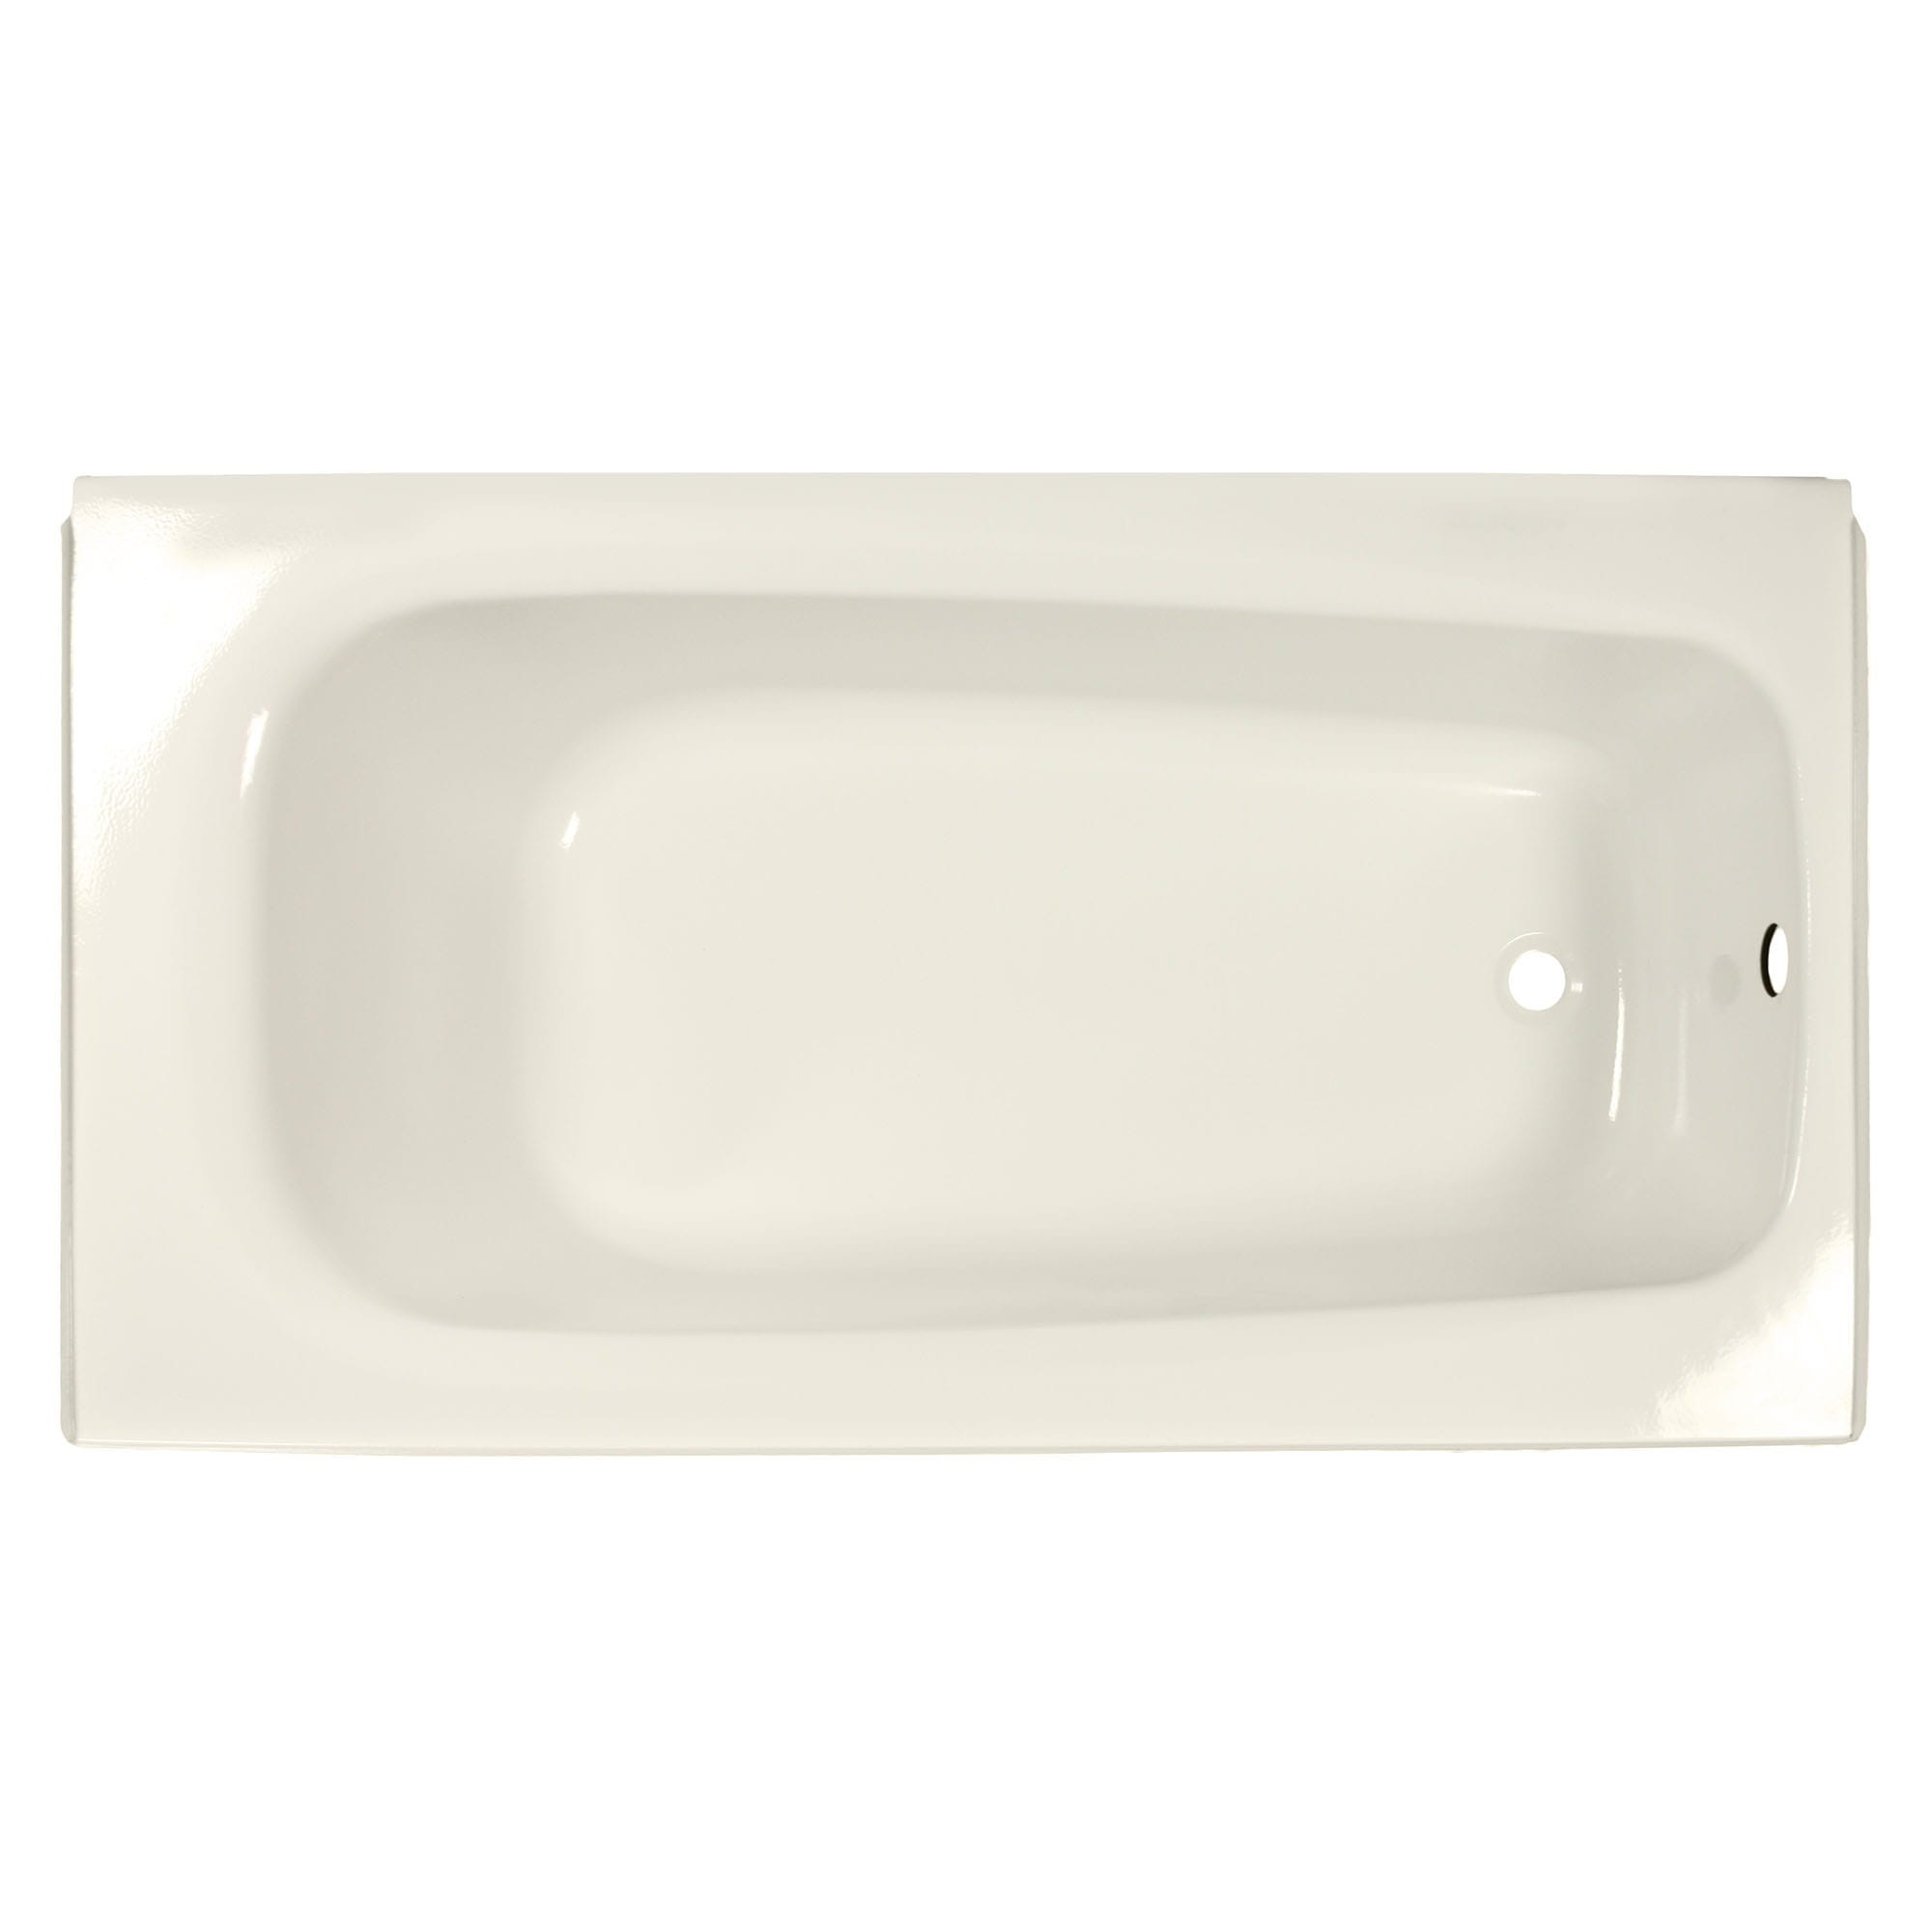 Cambridge Americast 60 x 32 Inch Integral Apron Bathtub With Right Hand Outlet LINEN